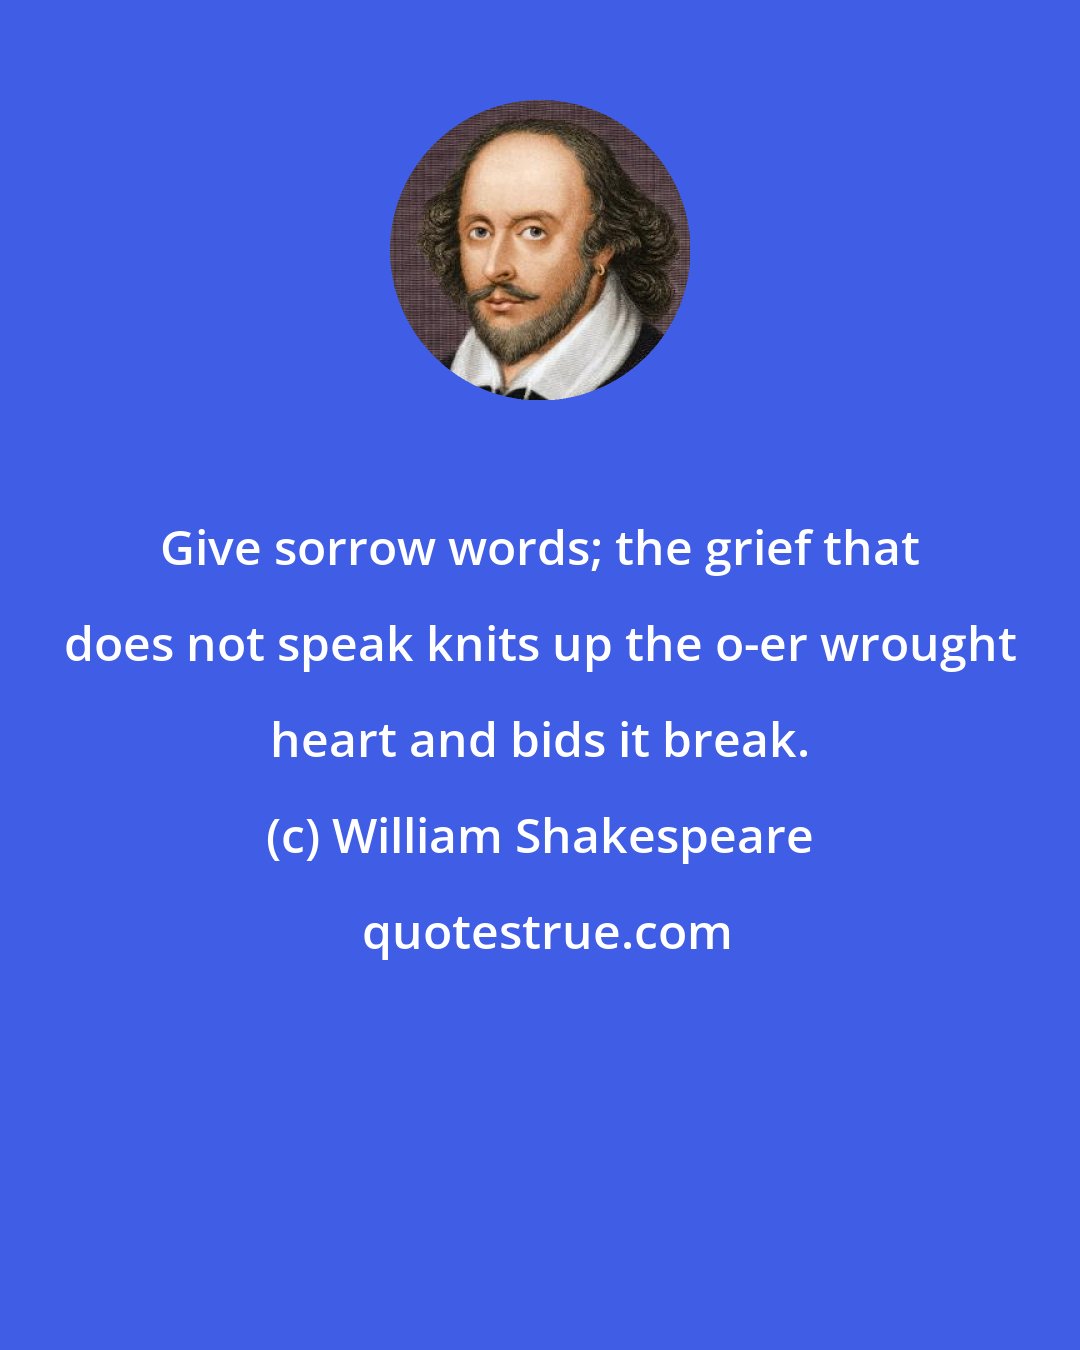 William Shakespeare: Give sorrow words; the grief that does not speak knits up the o-er wrought heart and bids it break.